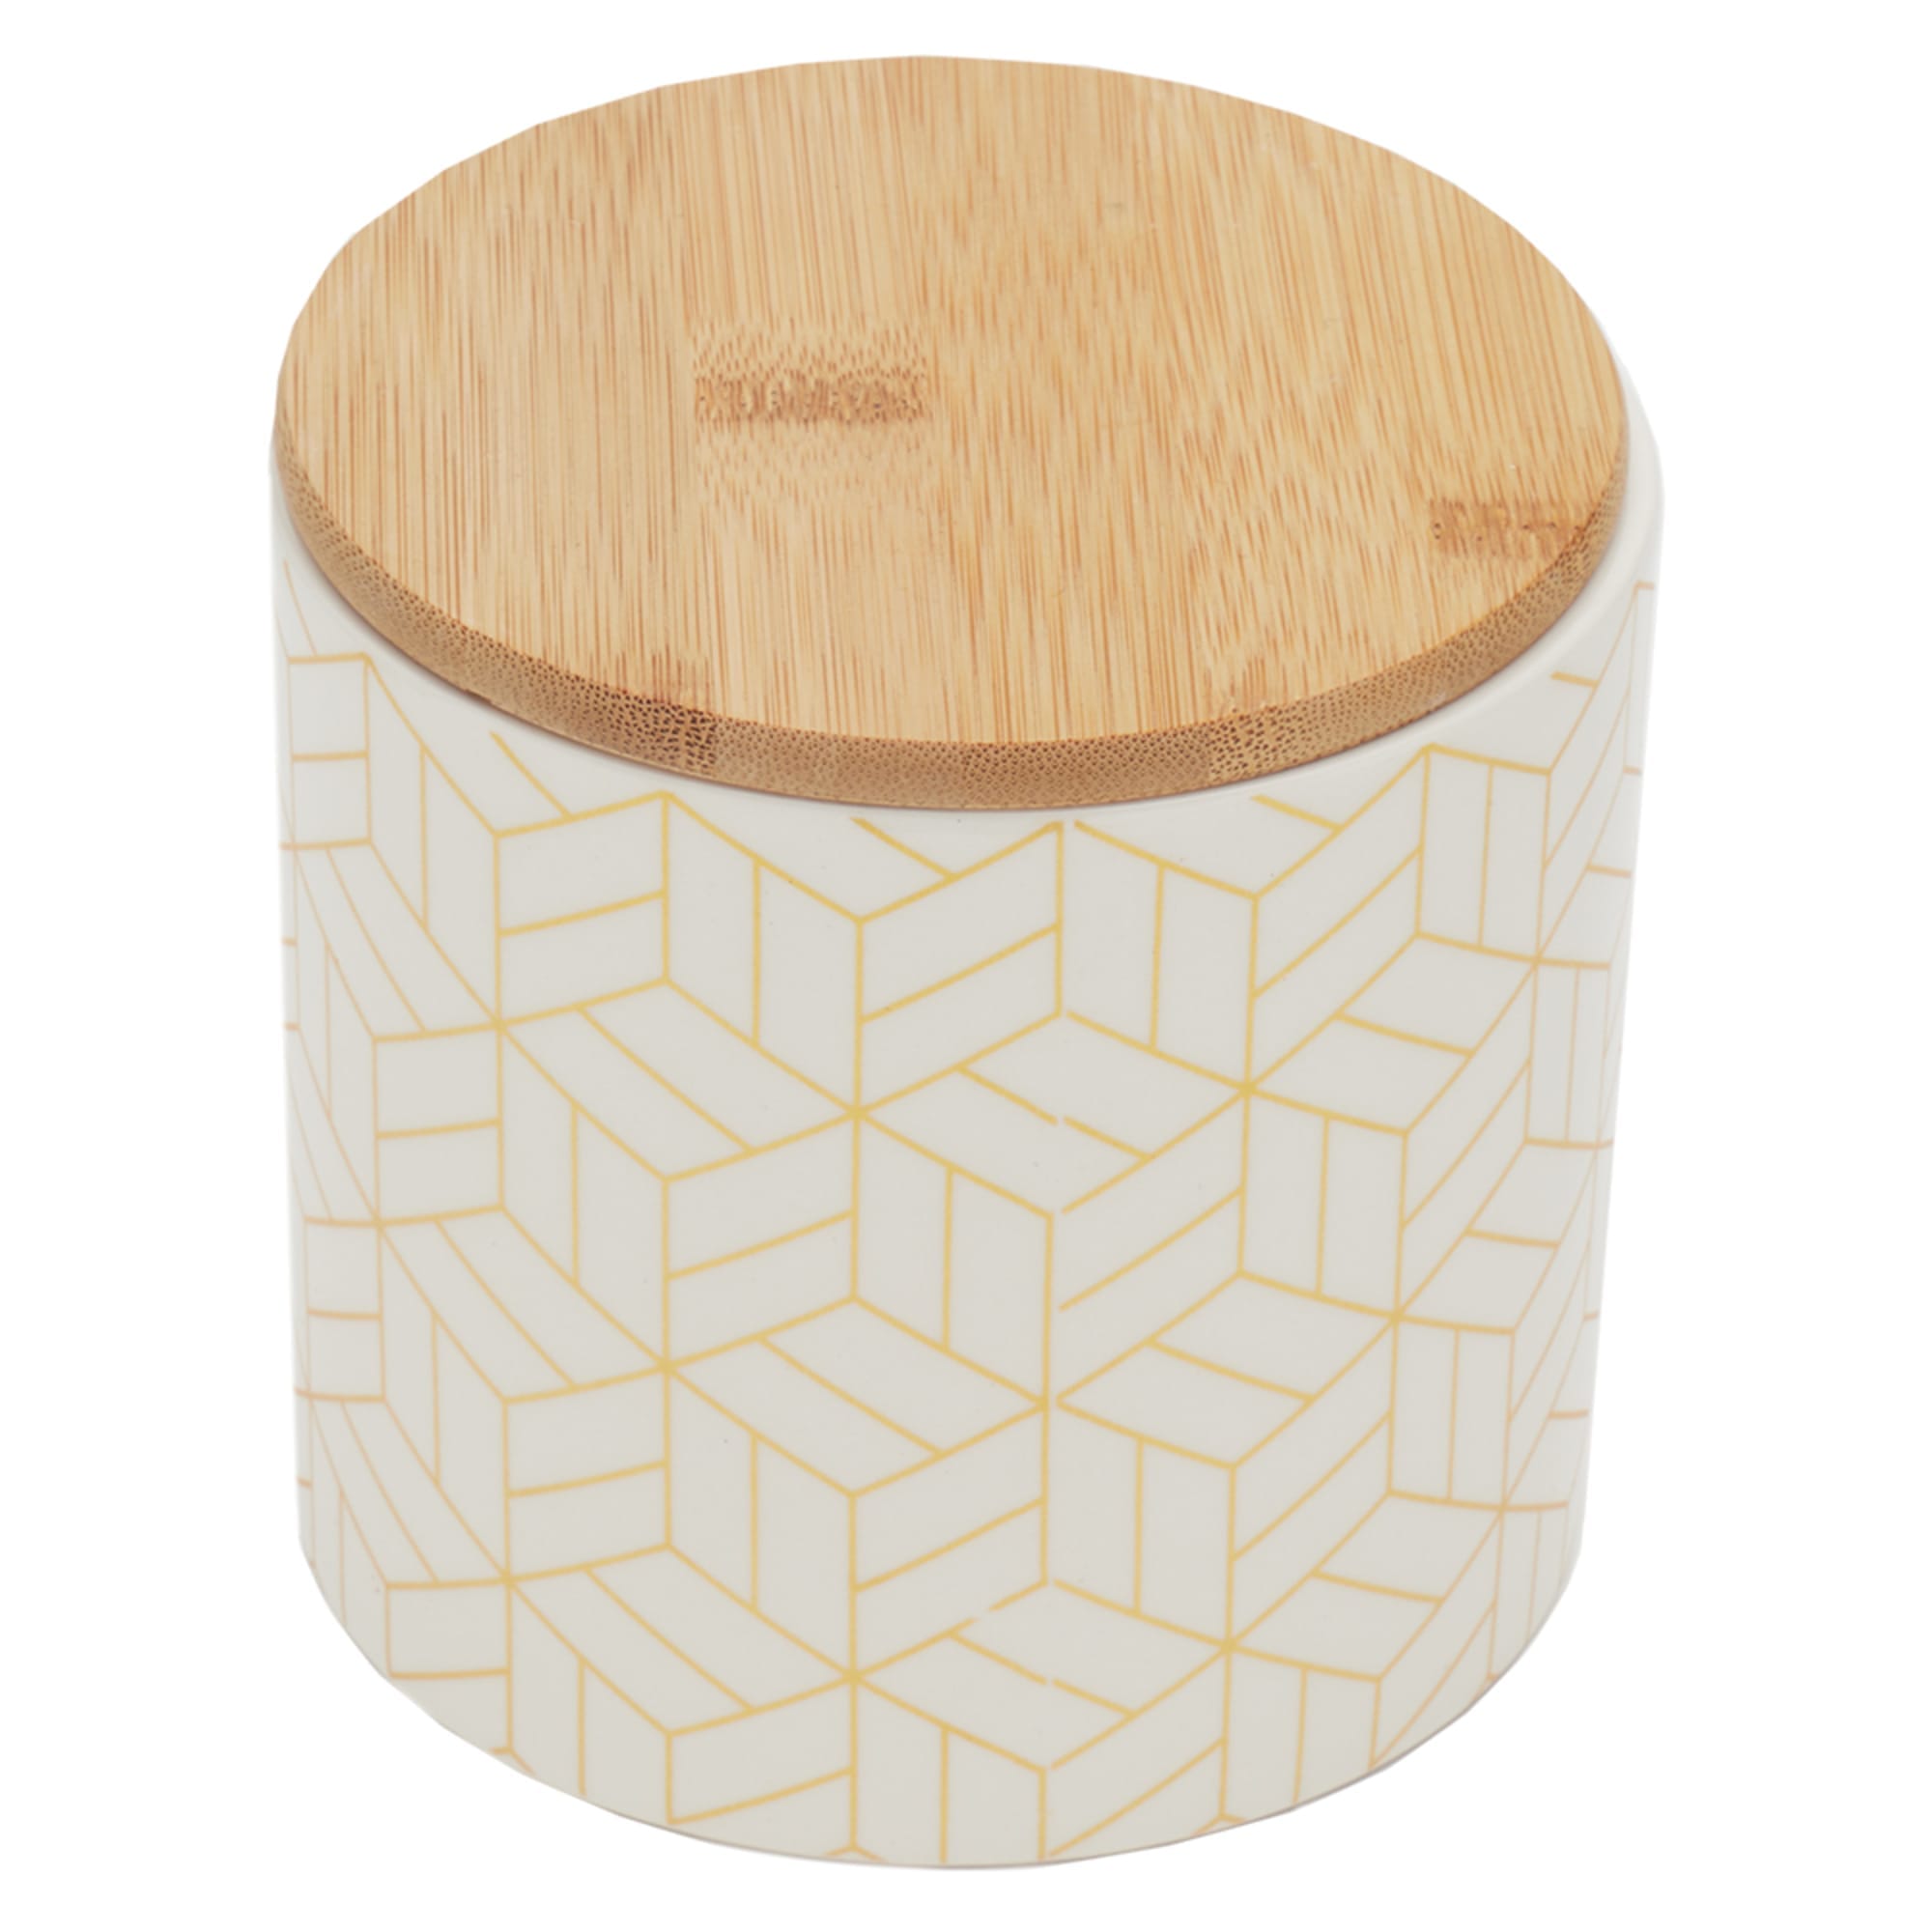 Home Basics Cubix Small Ceramic Canister with Bamboo Top $5.00 EACH, CASE PACK OF 12